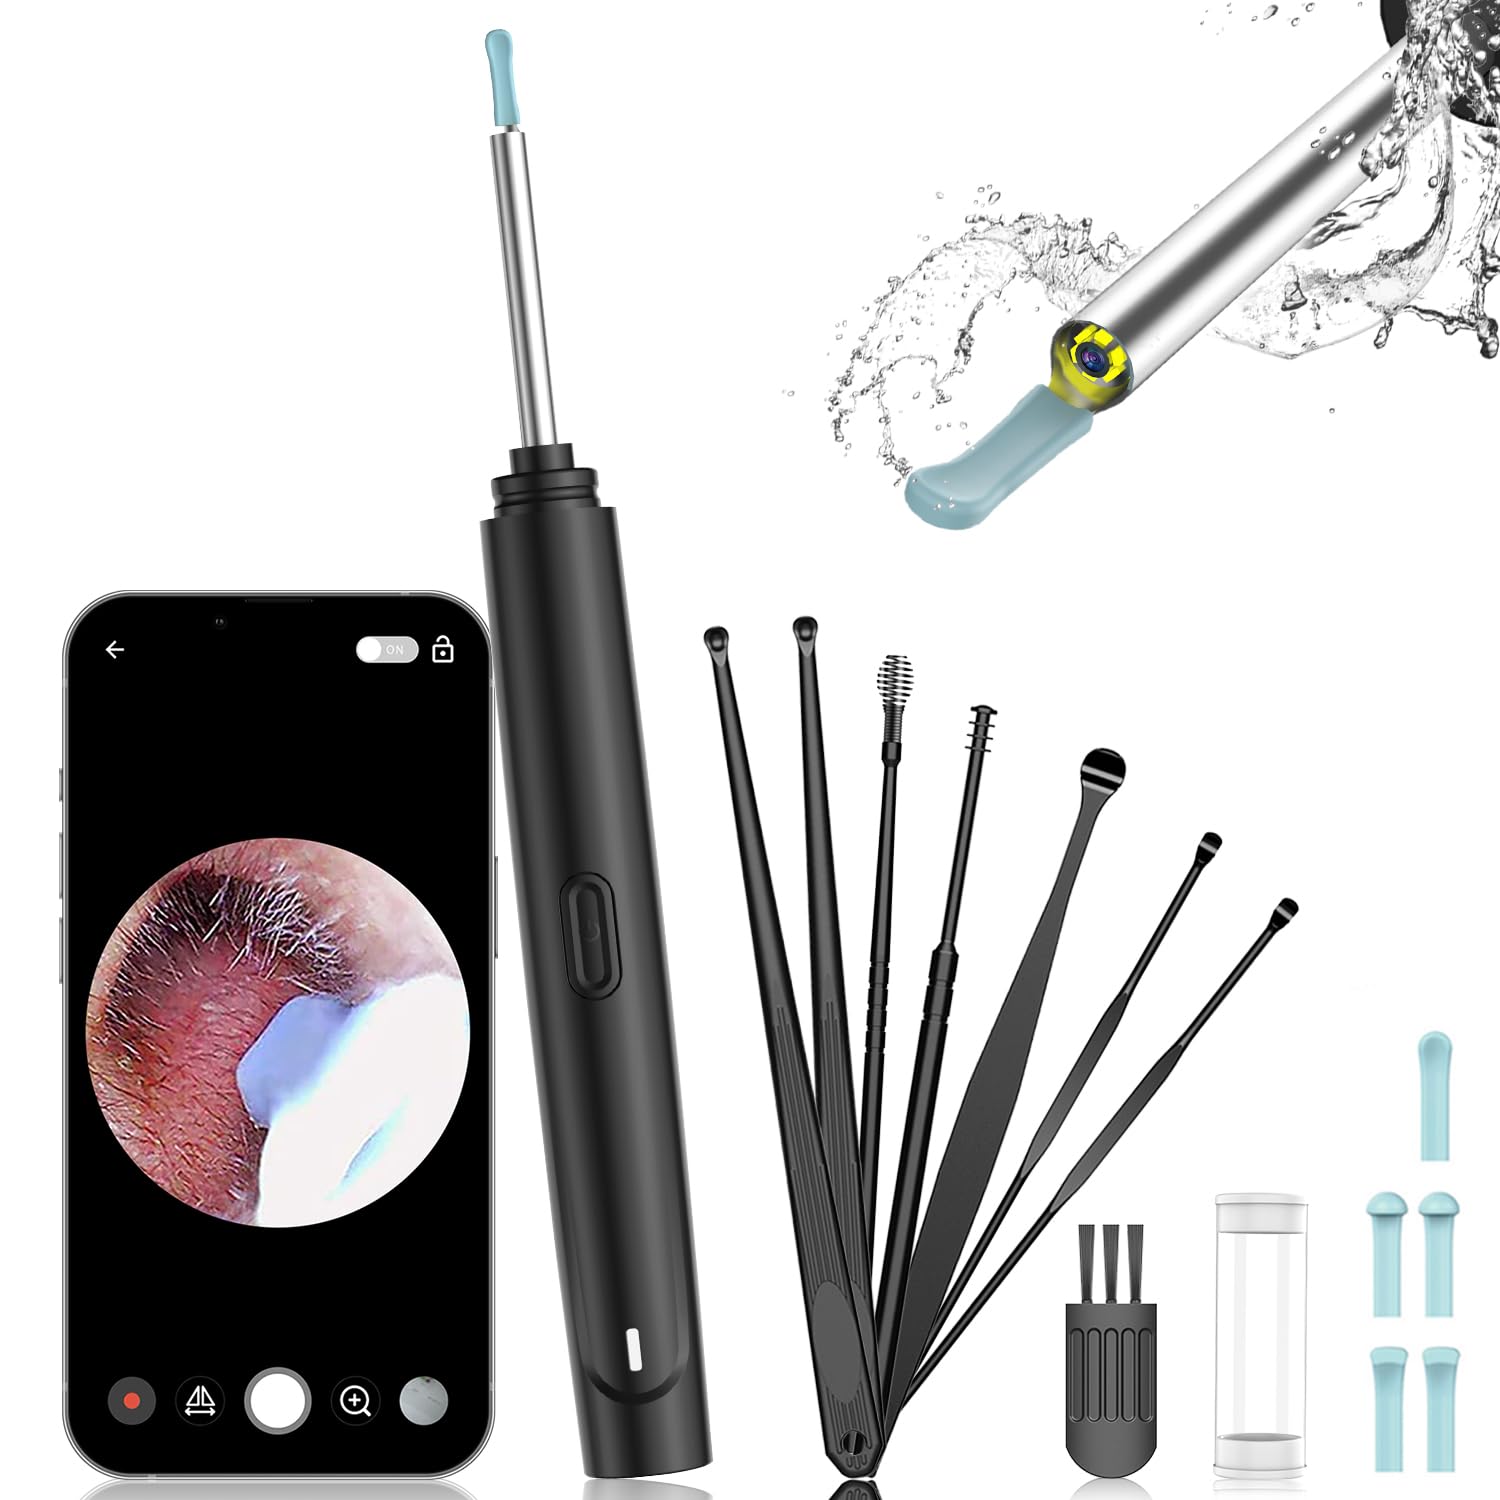 Ear Wax Removal Tool, Ear Wax Removal Ear Camera,ear Cleaning Camera,1080p  Hd Endoscope, Wireless Ear Cleaner Tools With 6 Led Lights Waterproof Ear S